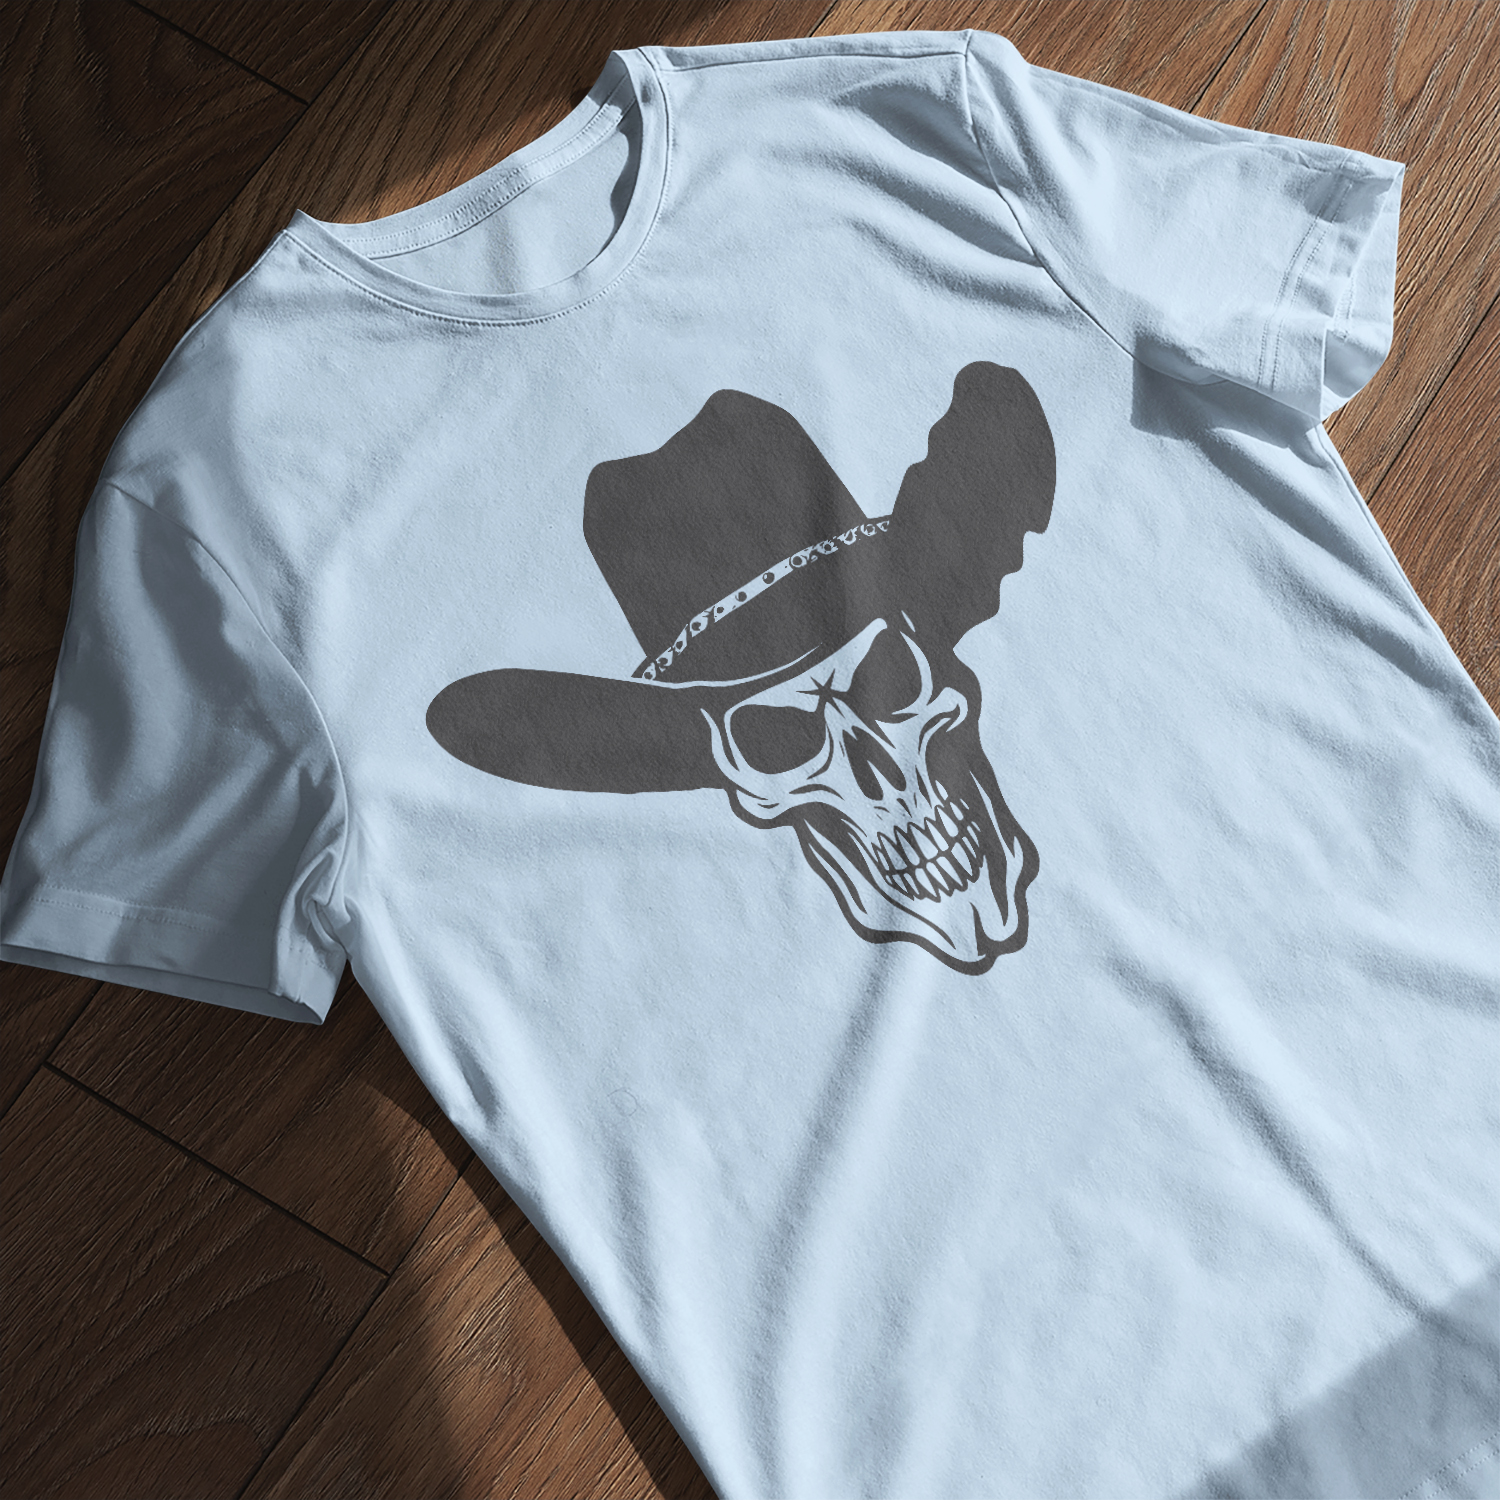 Cowboy Skull Instant Download SVG for Cricut, Silhouette, Laser Machines